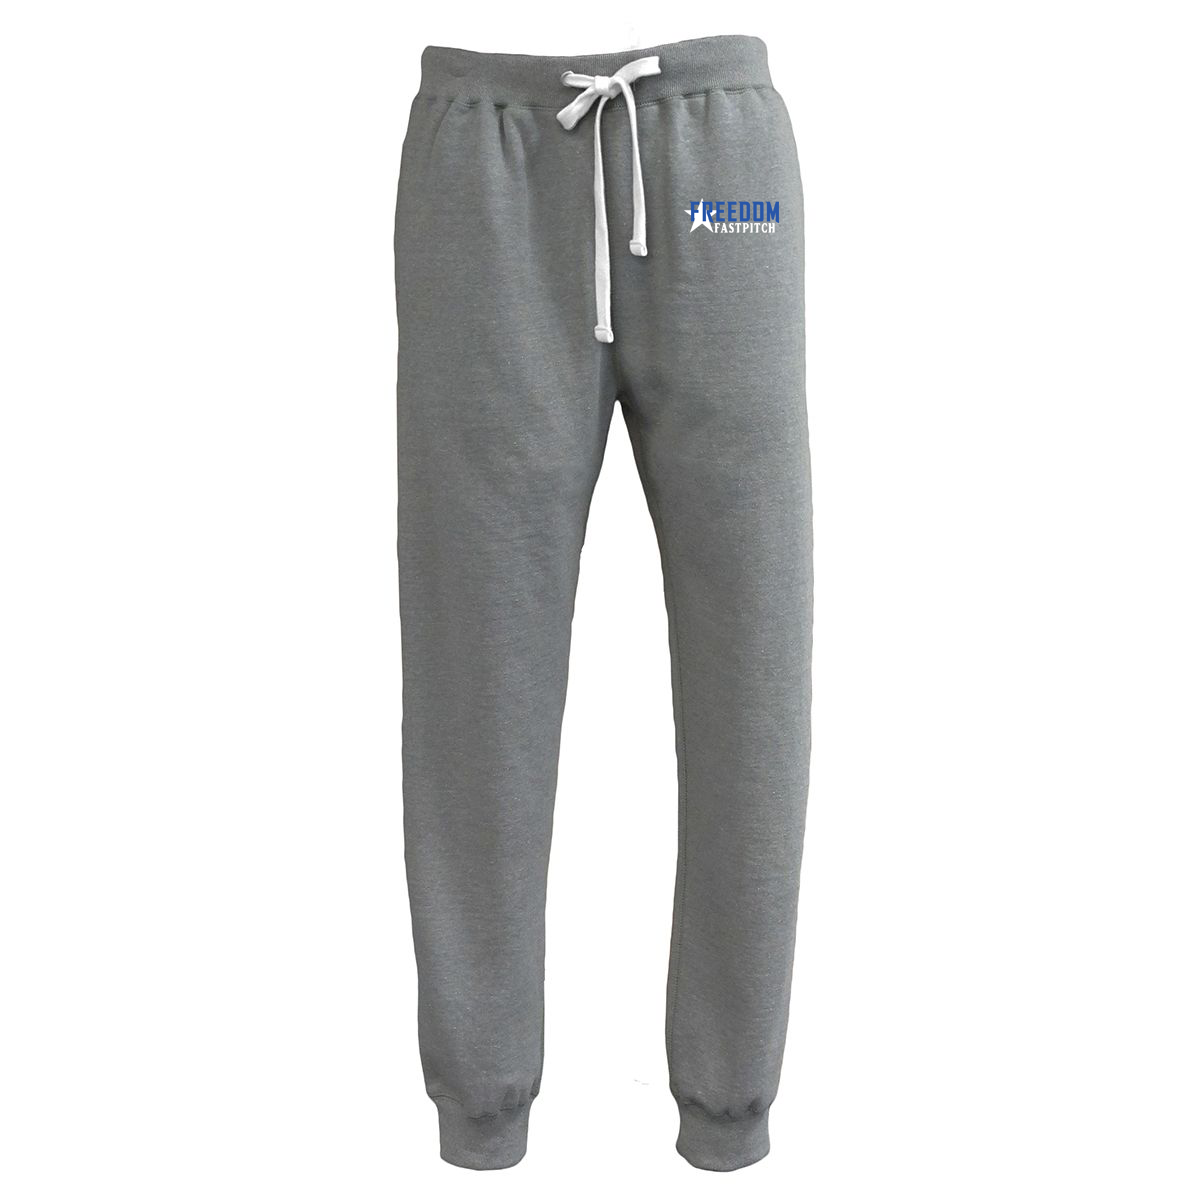 Freedom Fastpitch  Joggers